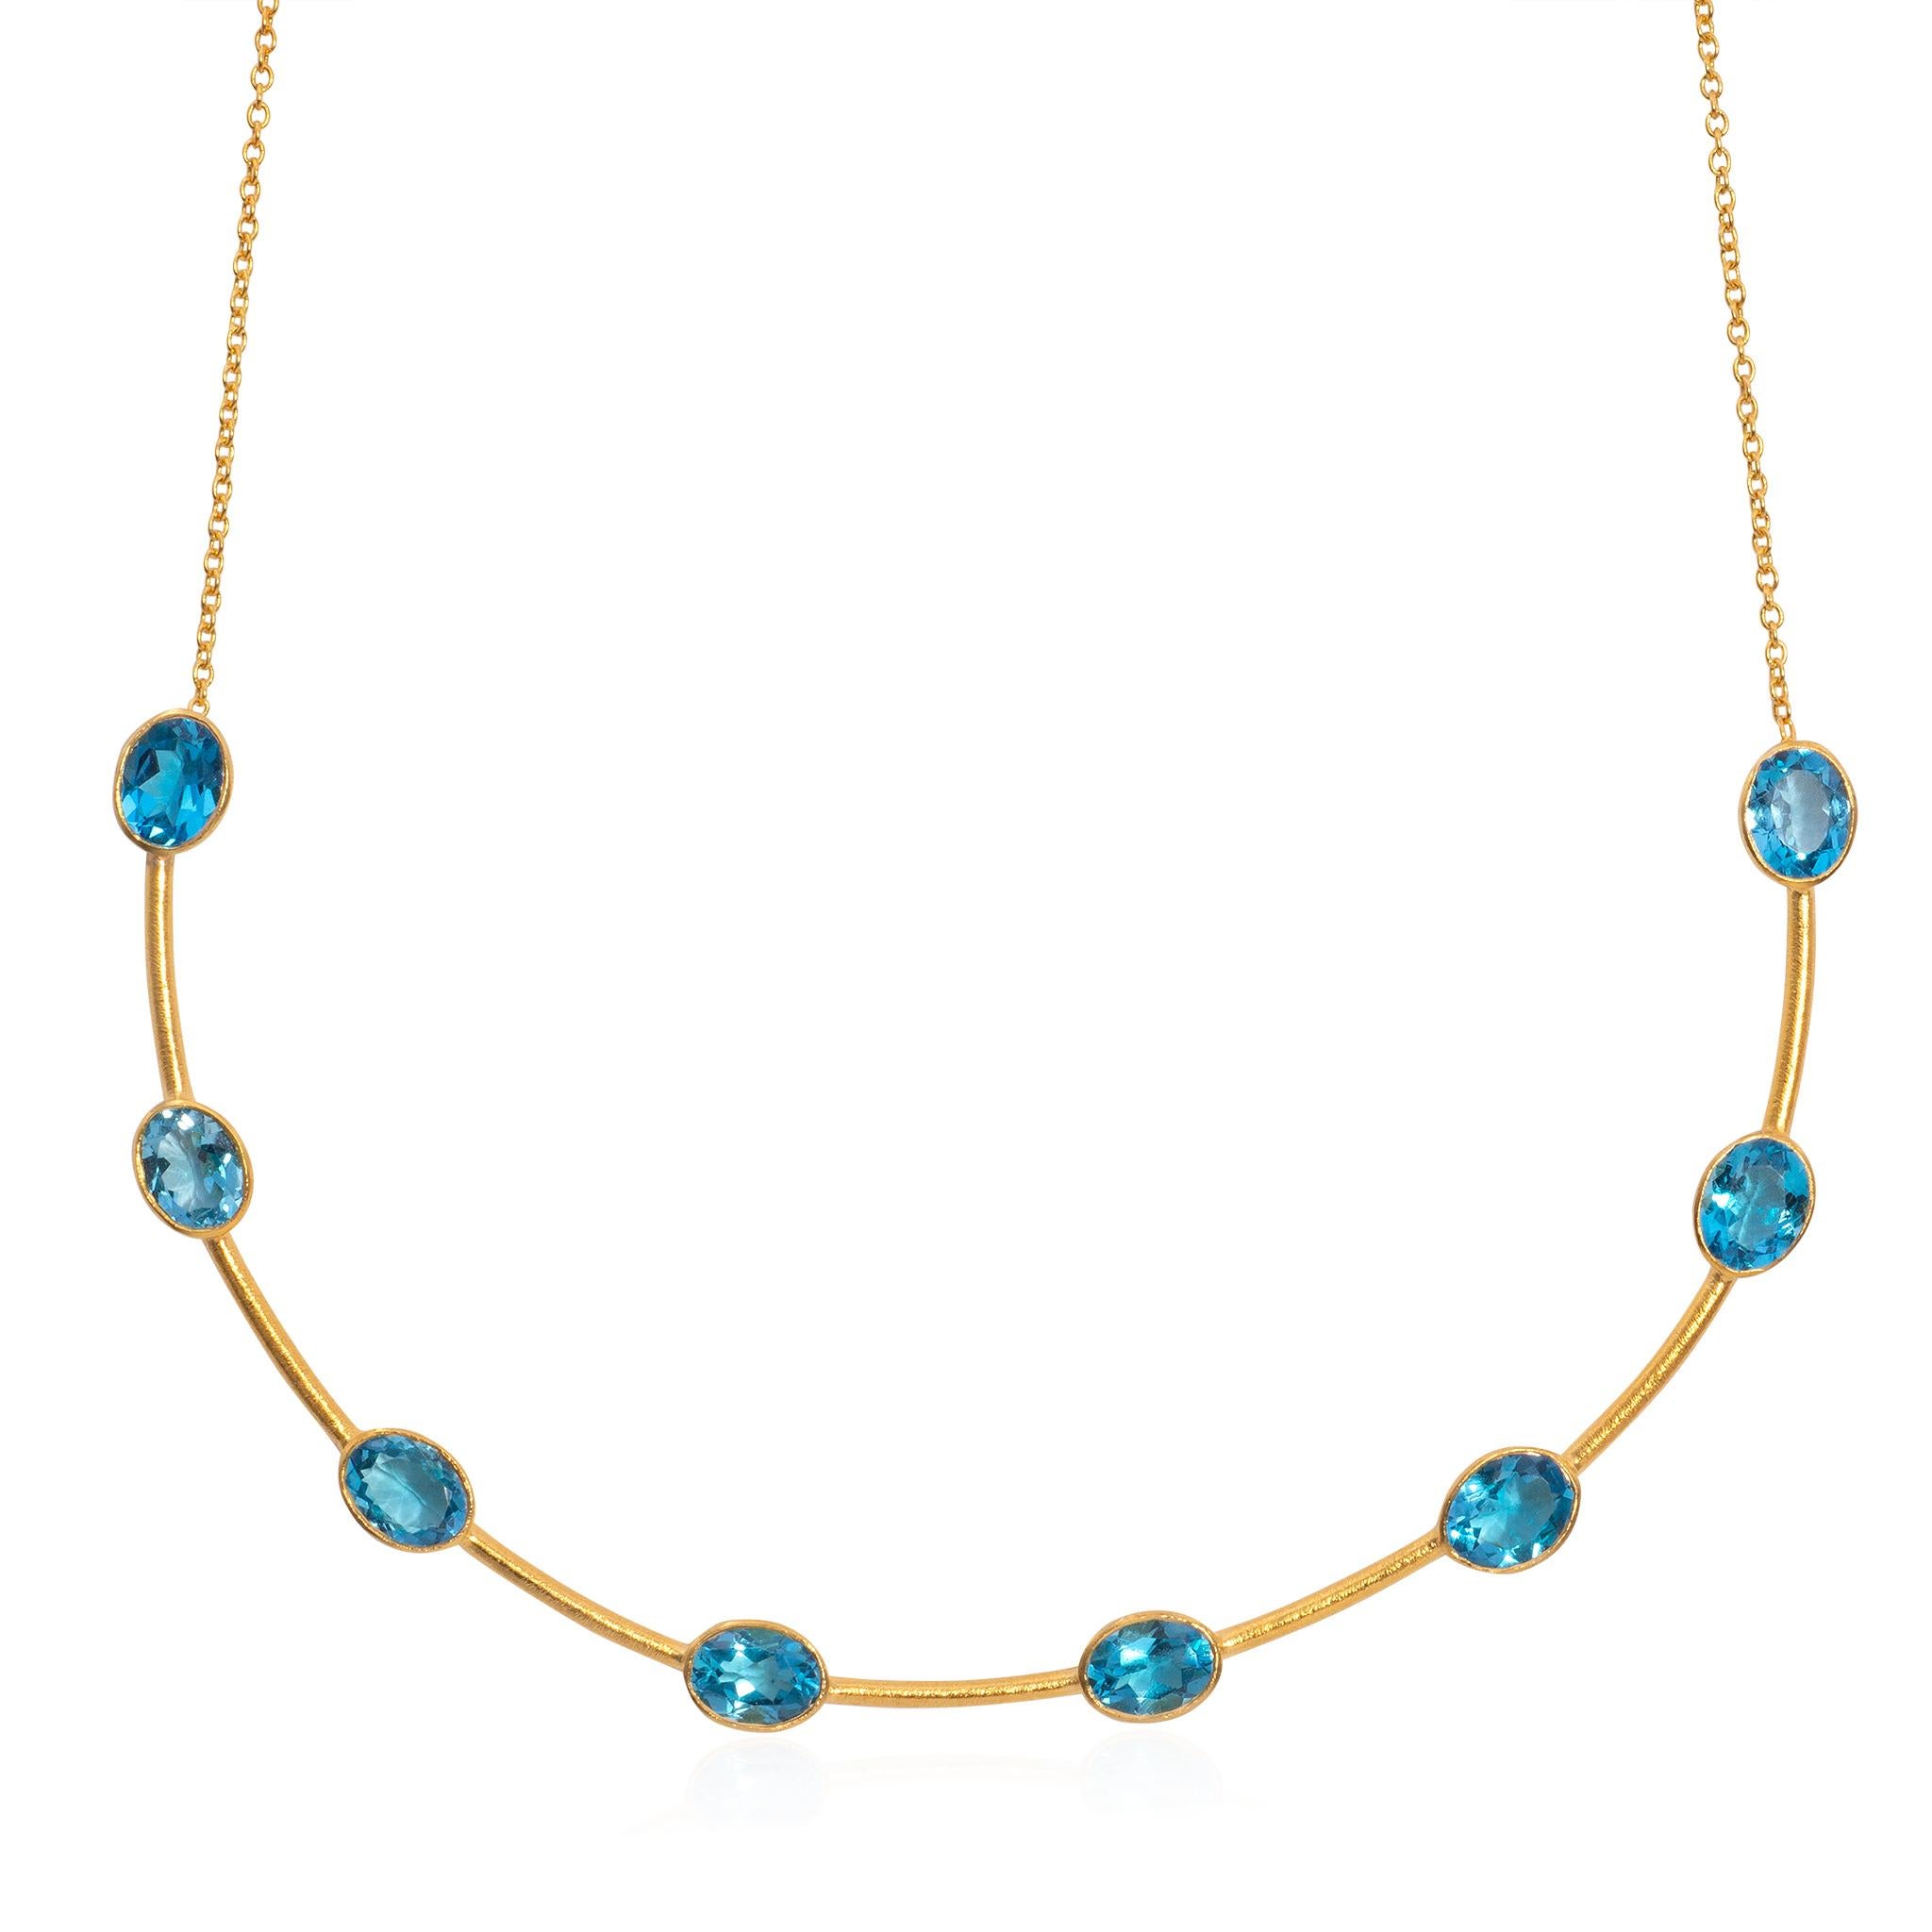 Another unique Merideth McGregor designed item. This April in Paris Designs Gold Vermeil Keisha Pearl Choker Necklace is an elegant piece to enhance your wardrobe. The necklace measure just under 5 inches across and is adorned with eight luscious